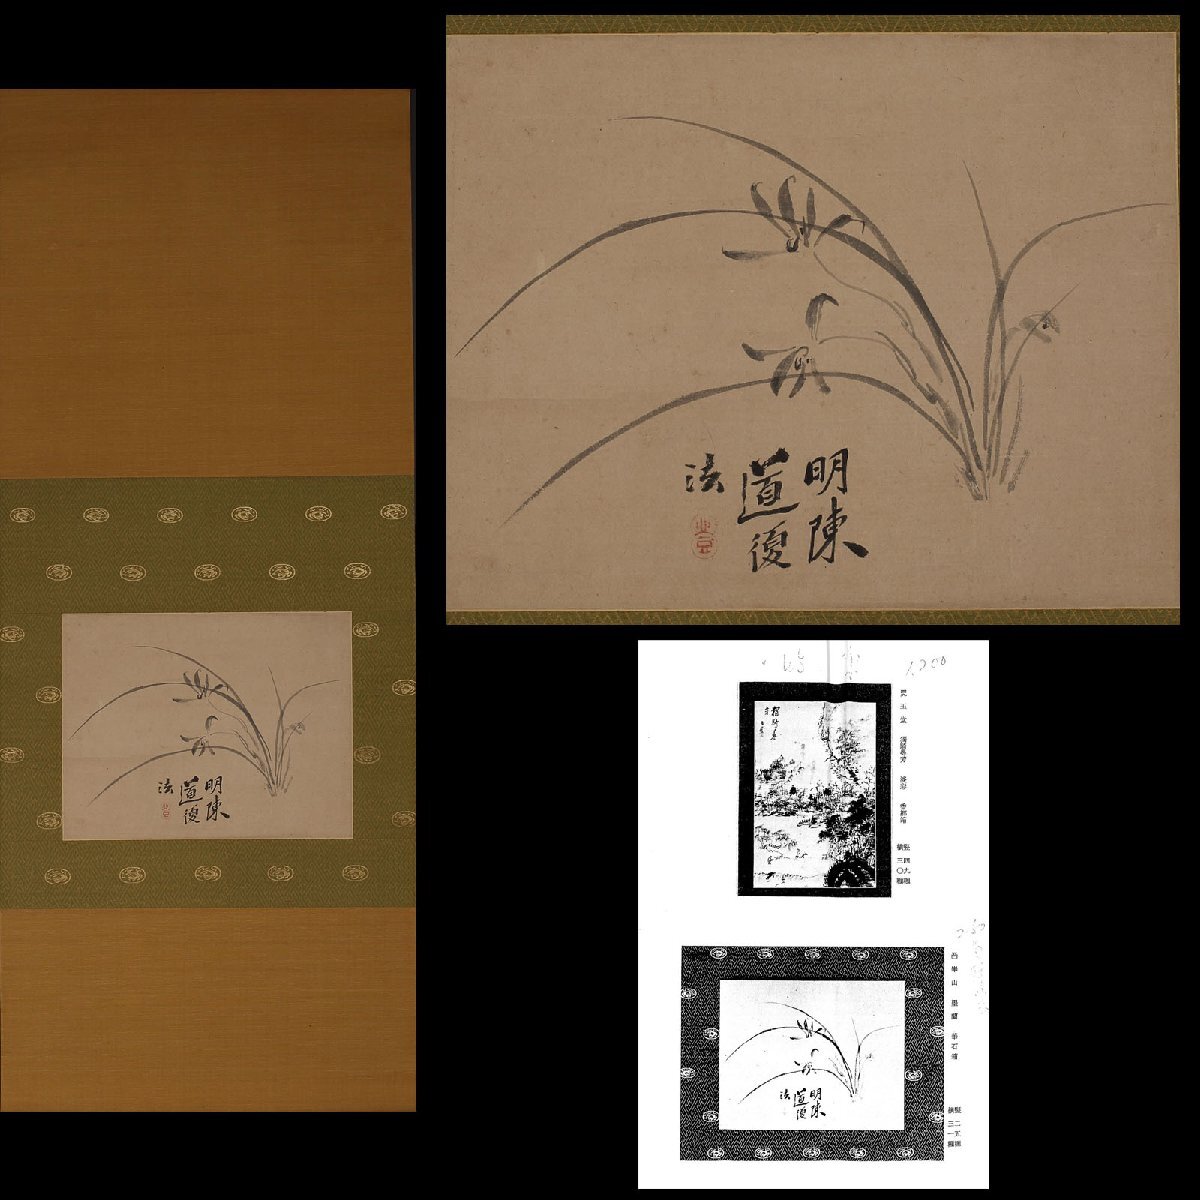 [Copy] Commissioned by HK◇Watanabe Kazan Orchid Sumi-e Watanabe Kaiseki Tobi Items listed in the Exhibition Catalog (Hanging scrolls, hanging scrolls, tea hangings, ink paintings, Japanese paintings, flowers, birds, orchids, painters, thinkers, Mikawa Tahara samurai), painting, Japanese painting, flowers and birds, birds and beasts